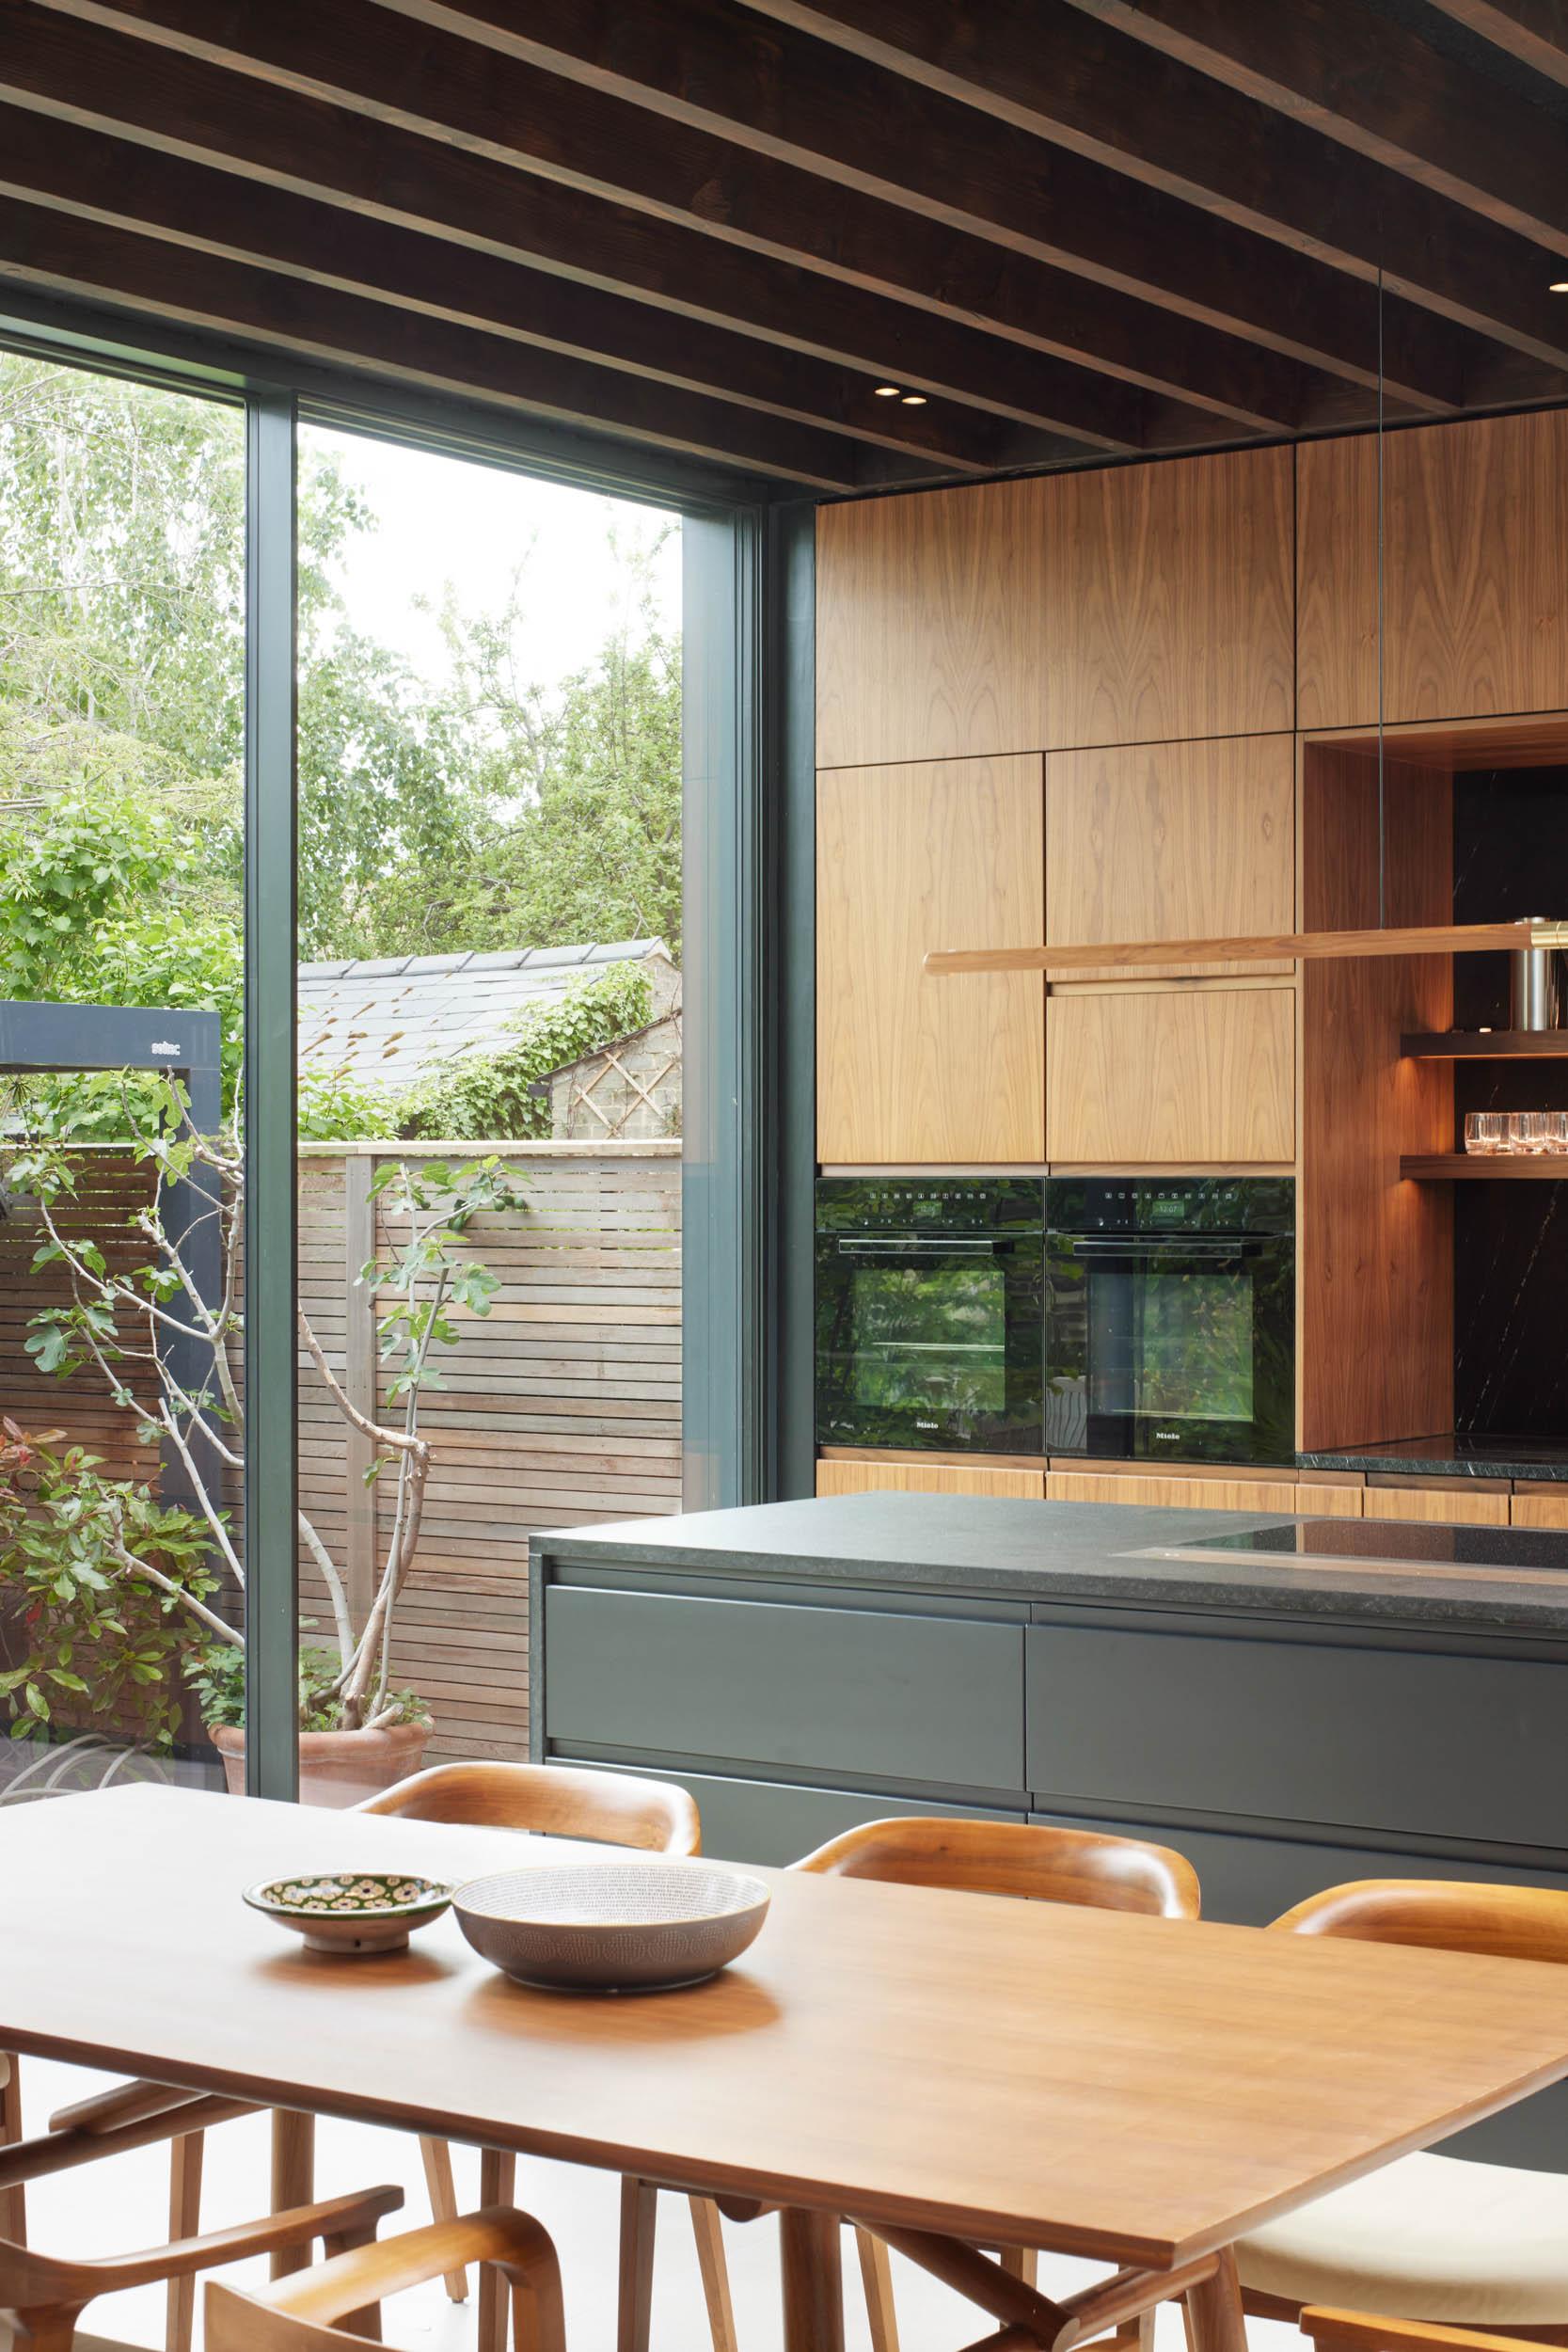 Light flooding into the space via the large sliding doors to the garden| cdc studio cambridge architects